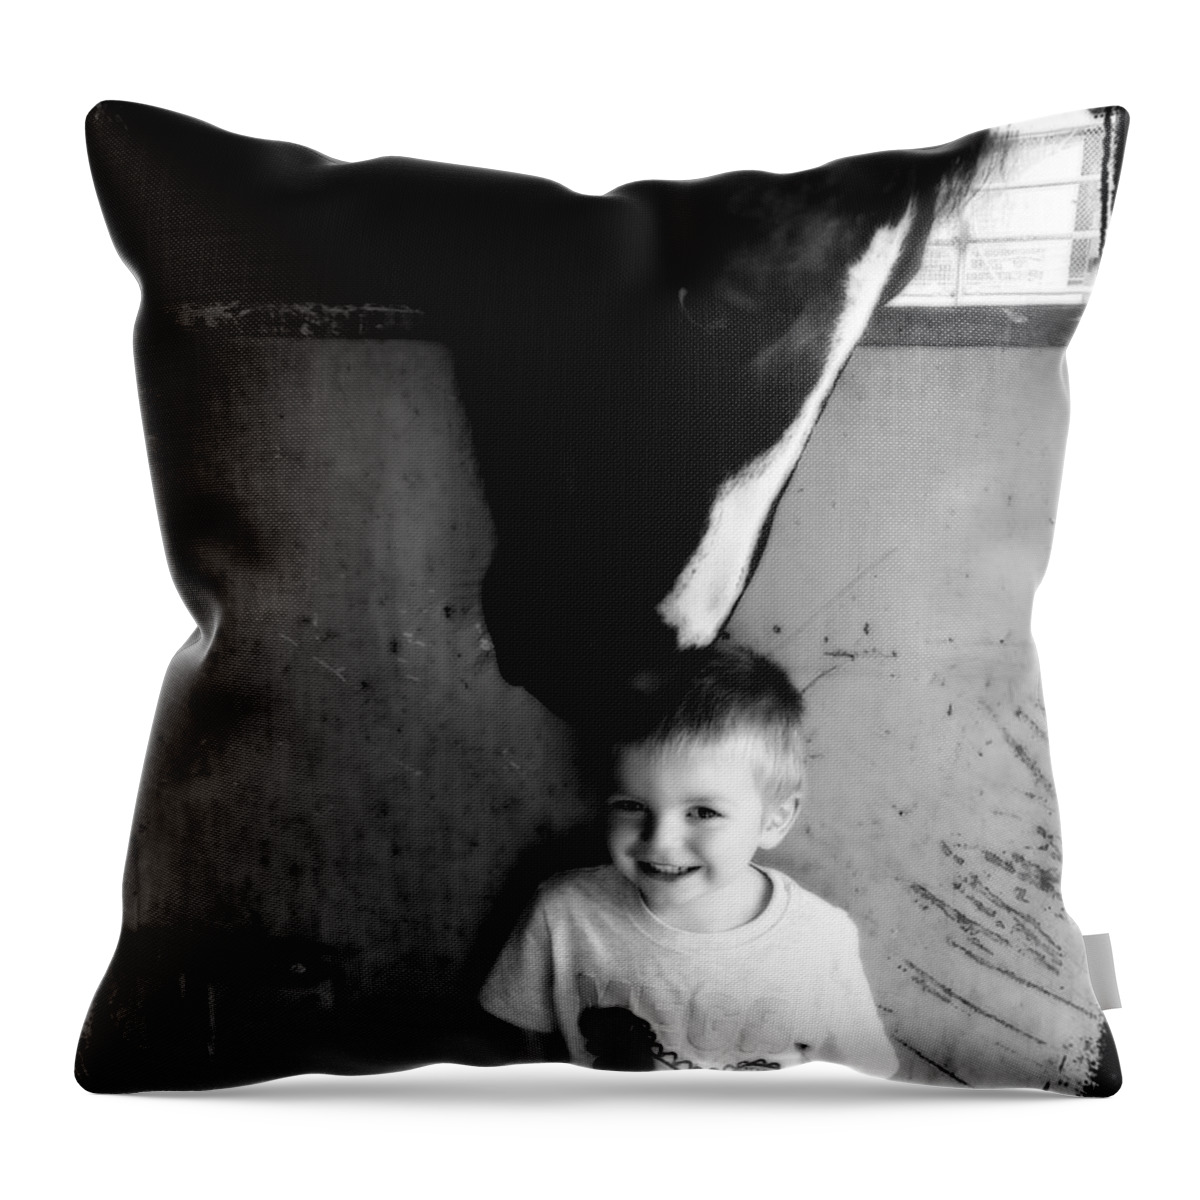 Horse Throw Pillow featuring the photograph Horses Love by Amanda Eberly